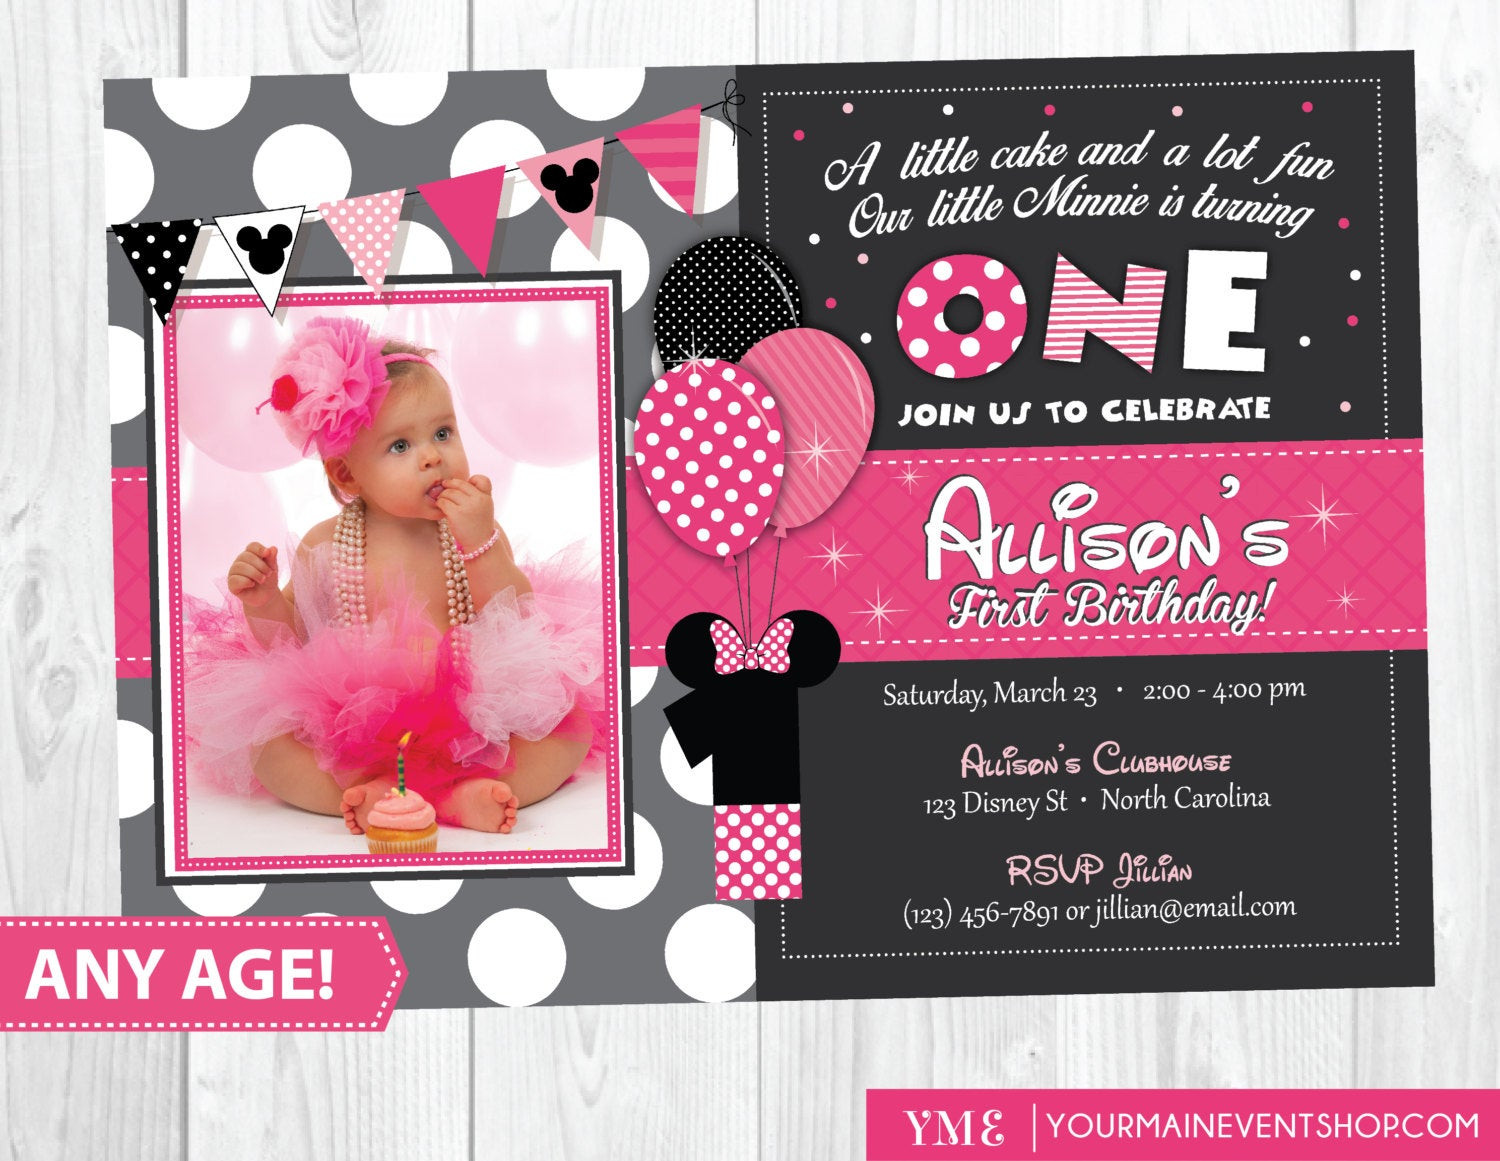 Minnie Mouse 1st Birthday Personalized Invitations
 Minnie Mouse Birthday Invitation Minnie Mouse Inspired